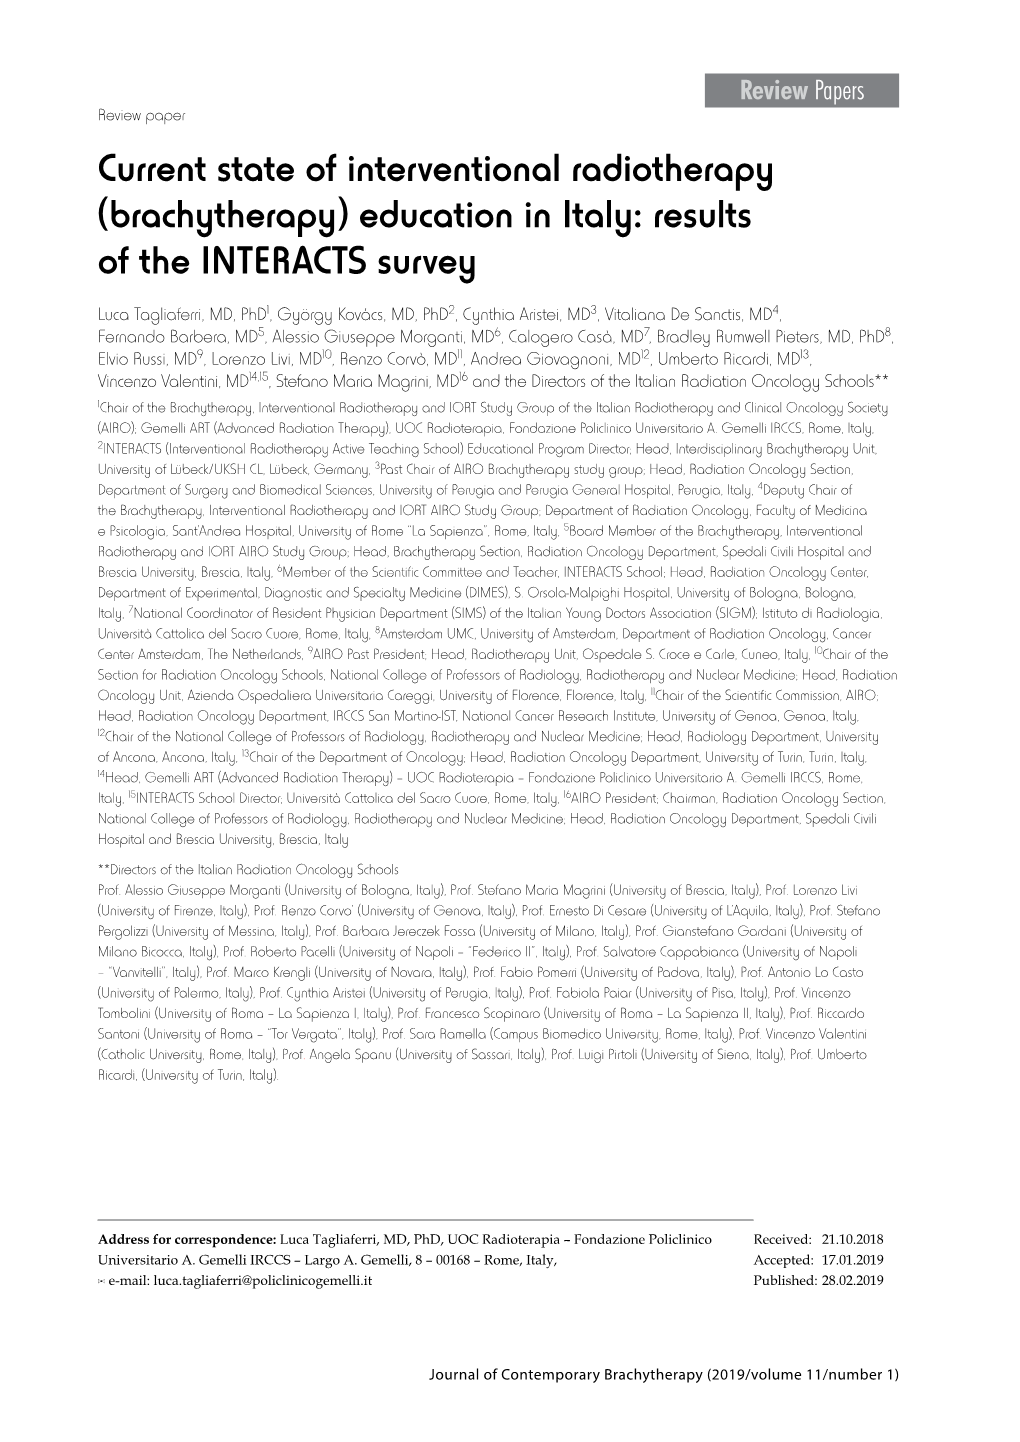 (Brachytherapy) Education in Italy: Results of the INTERACTS Survey